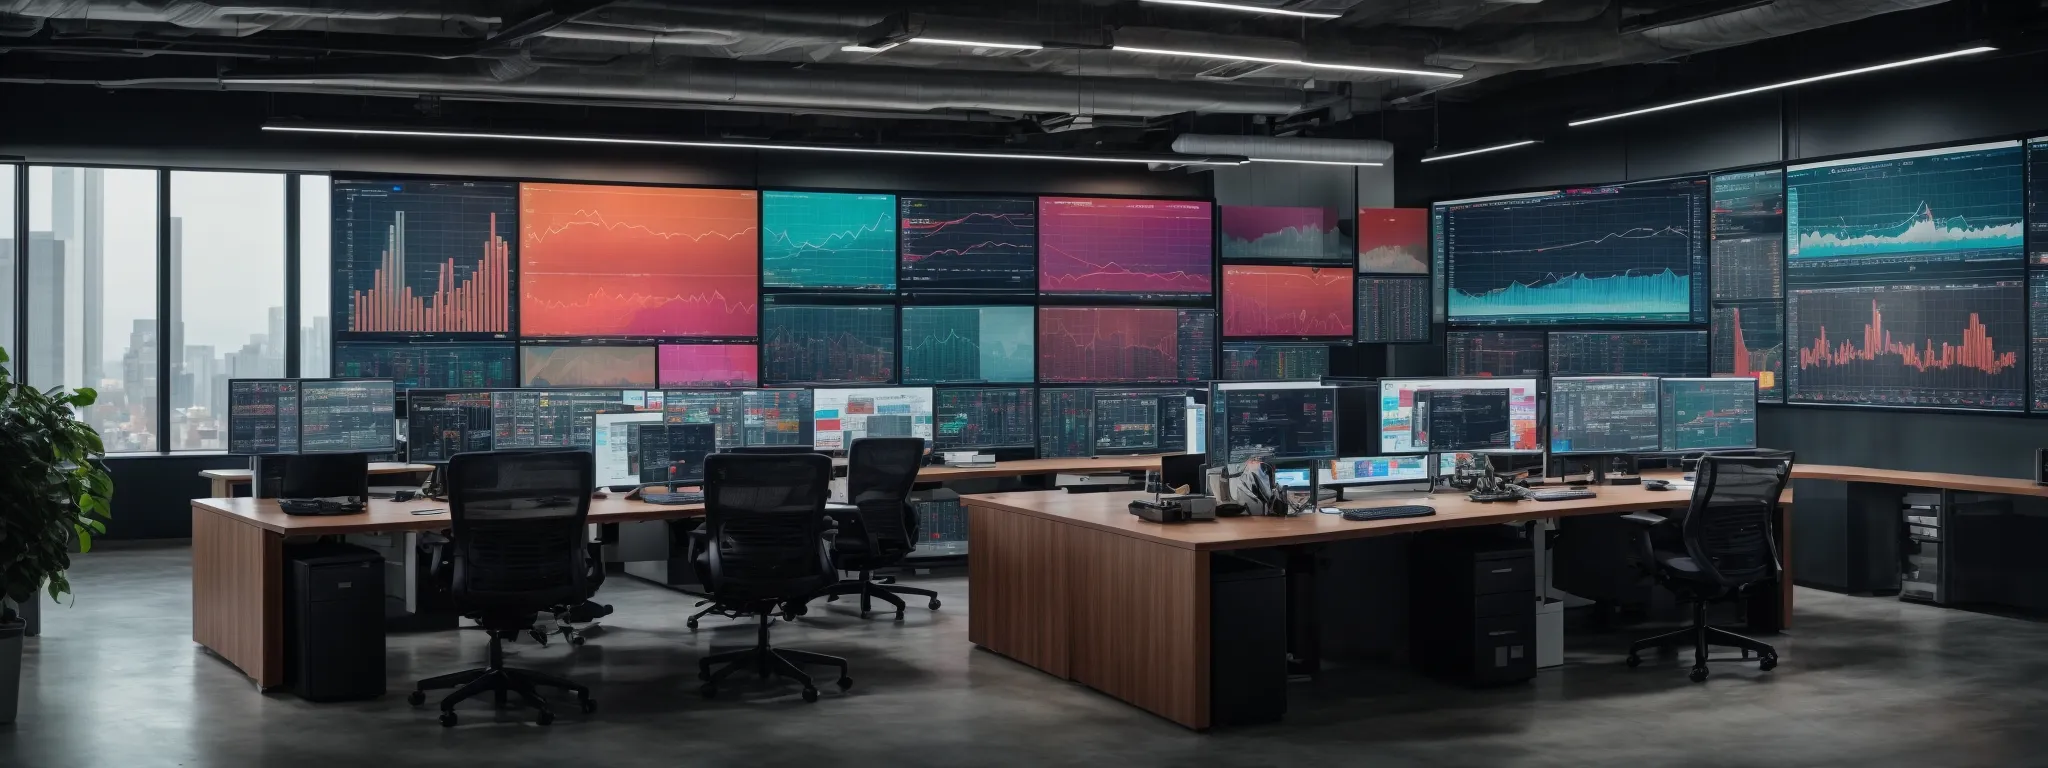 a panoramic view of a modern office space with multiple computer screens displaying colorful graphs and data analytics dashboards.